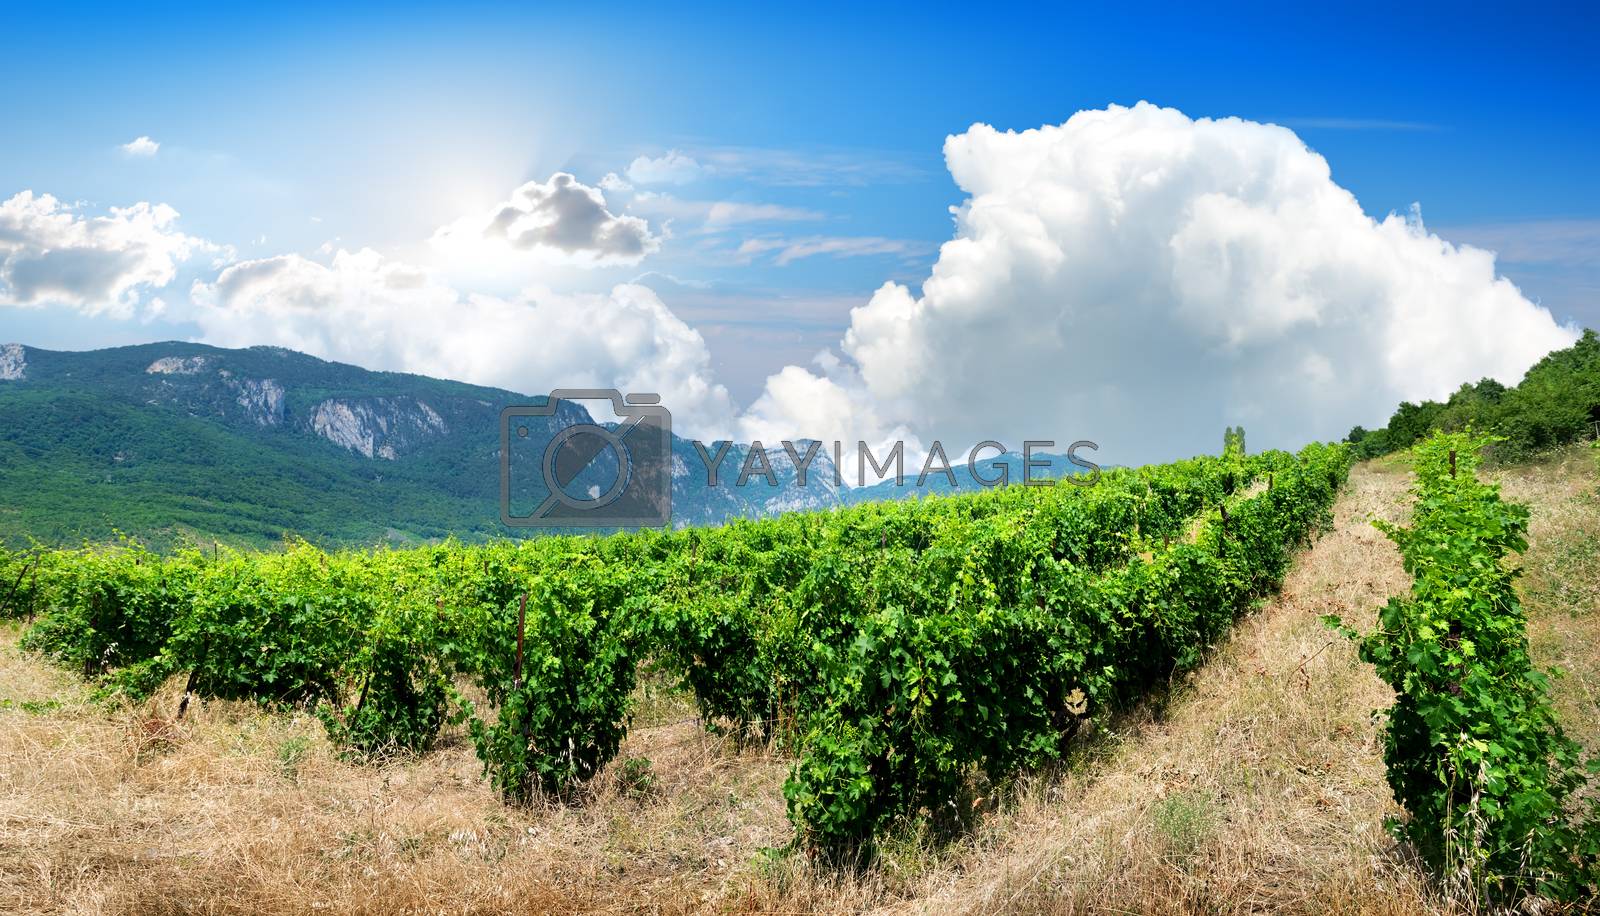 Royalty free image of Mountains and vineyard by Givaga